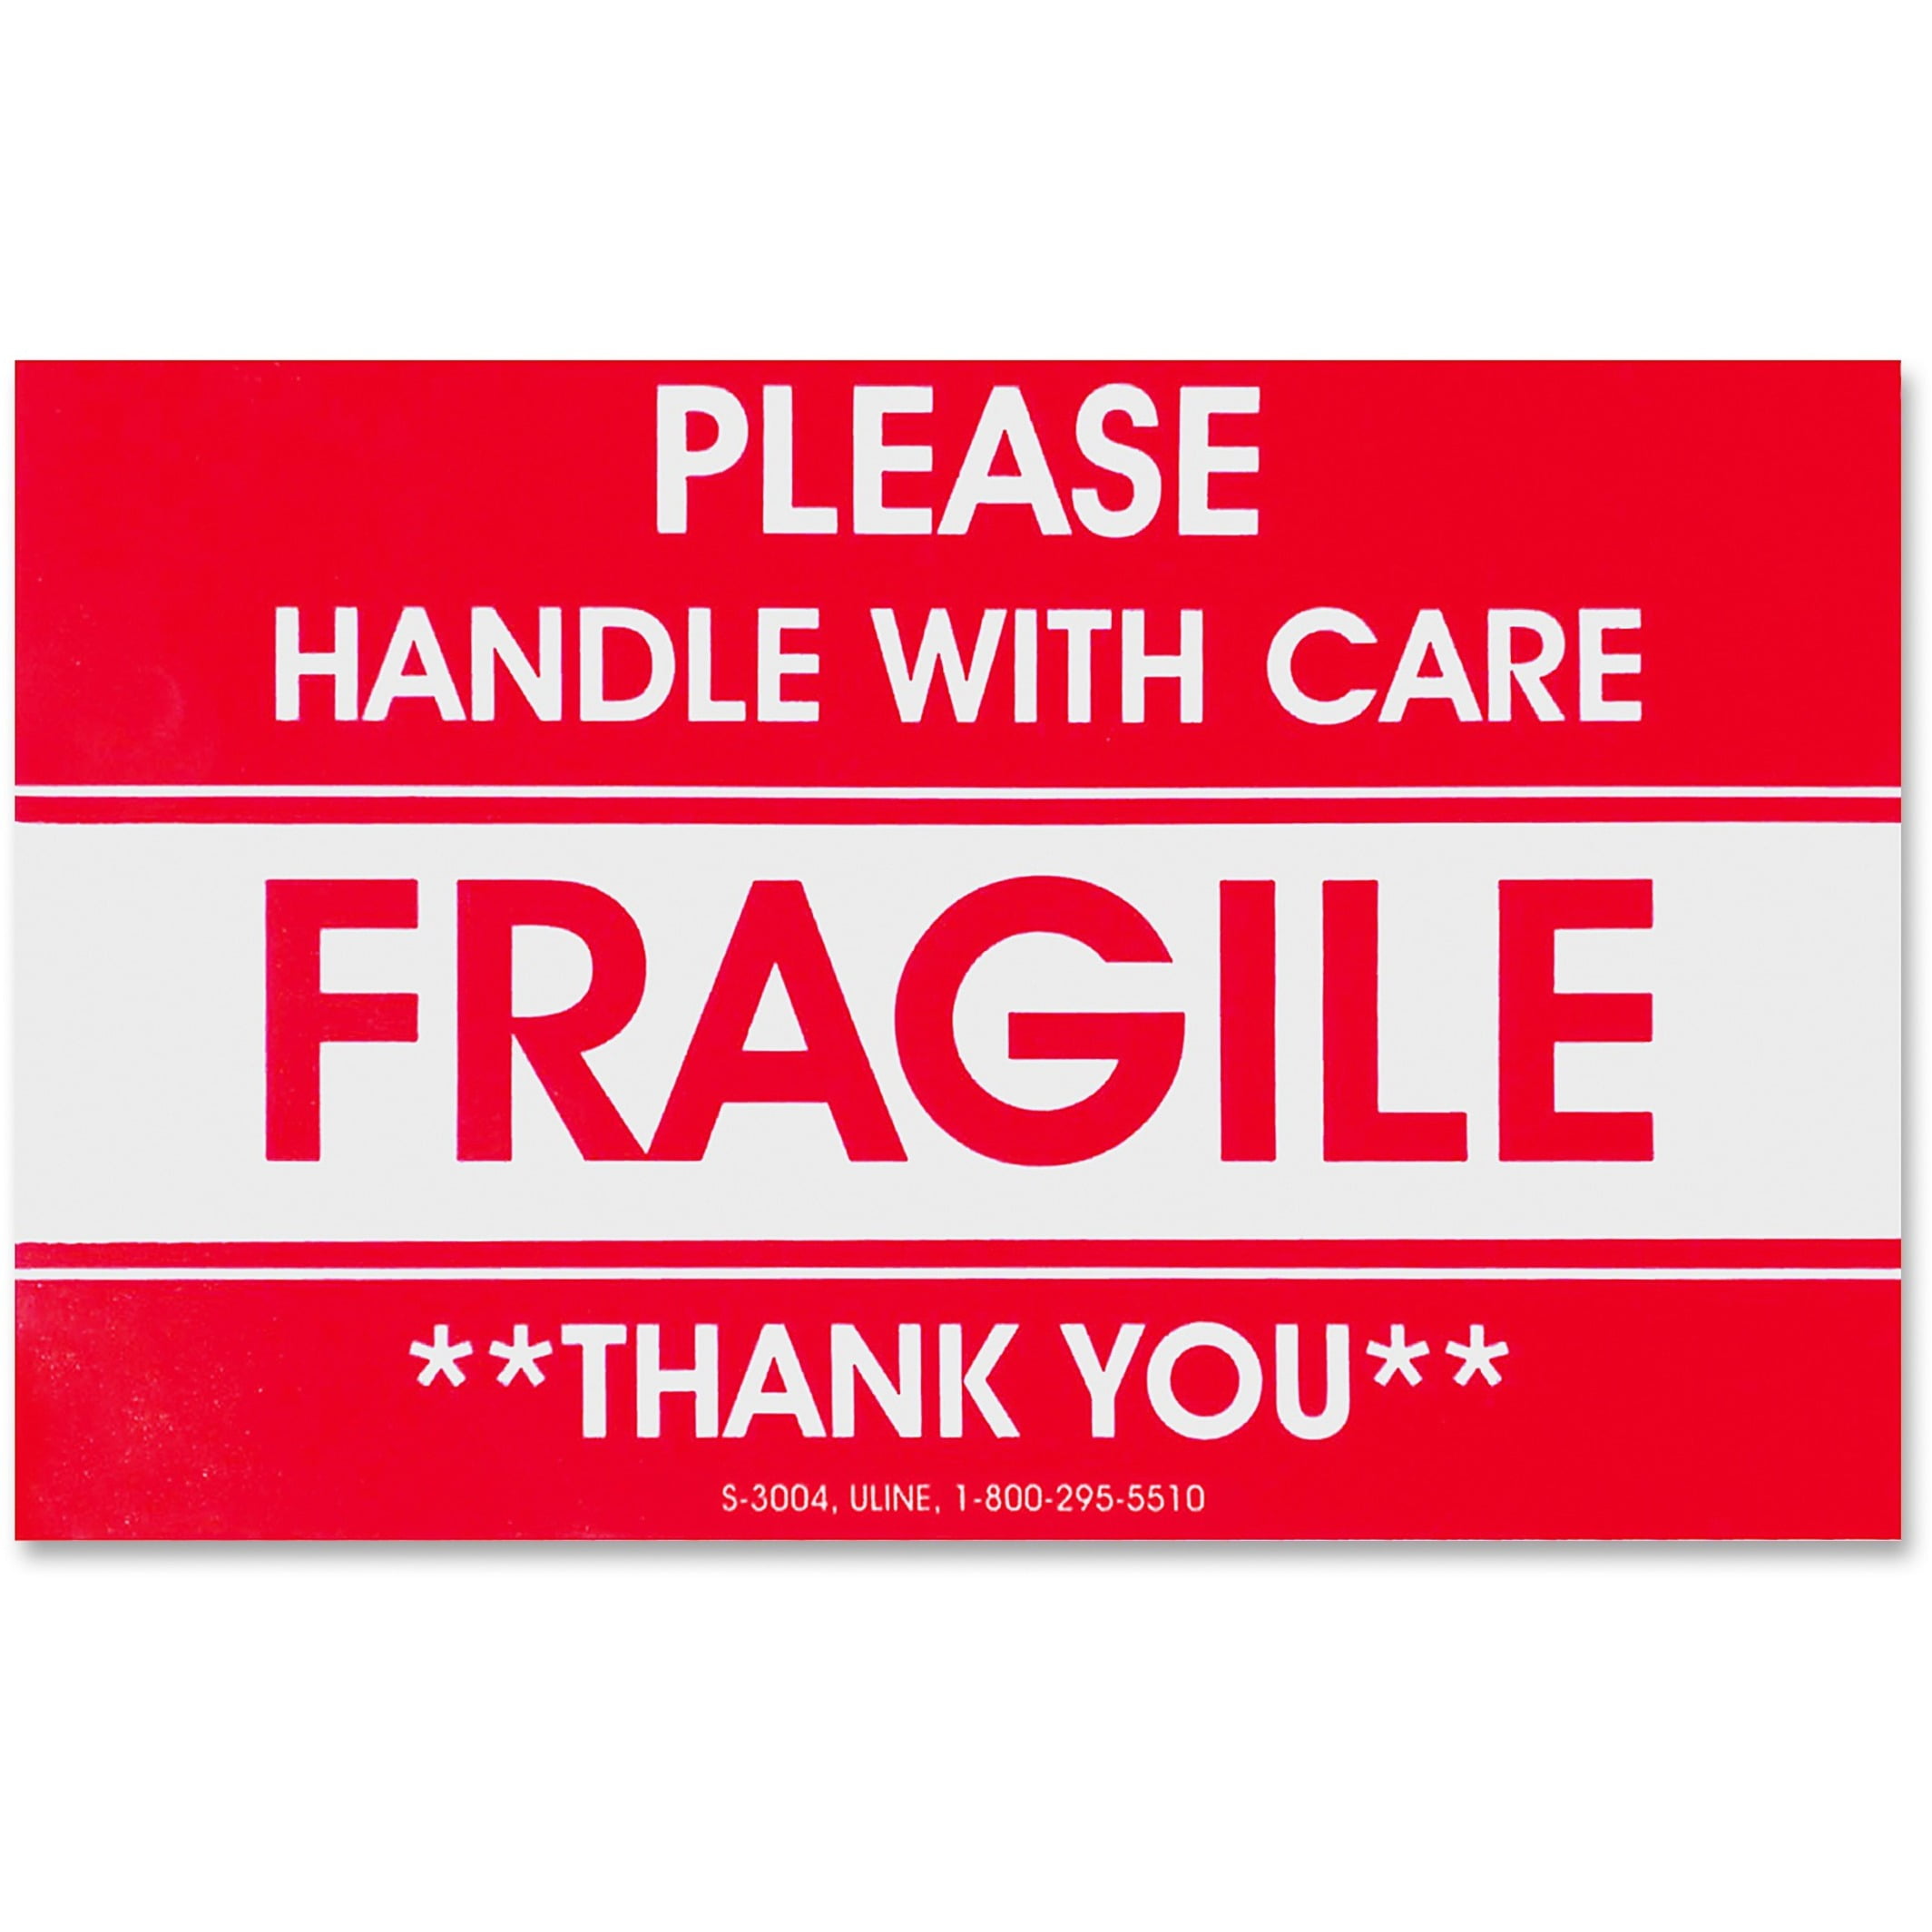 This way please. Fragile Handle with Care. Fragile please Handle with Care. Наклейка fragile Handle with Care. Наклейки fragile для печати.